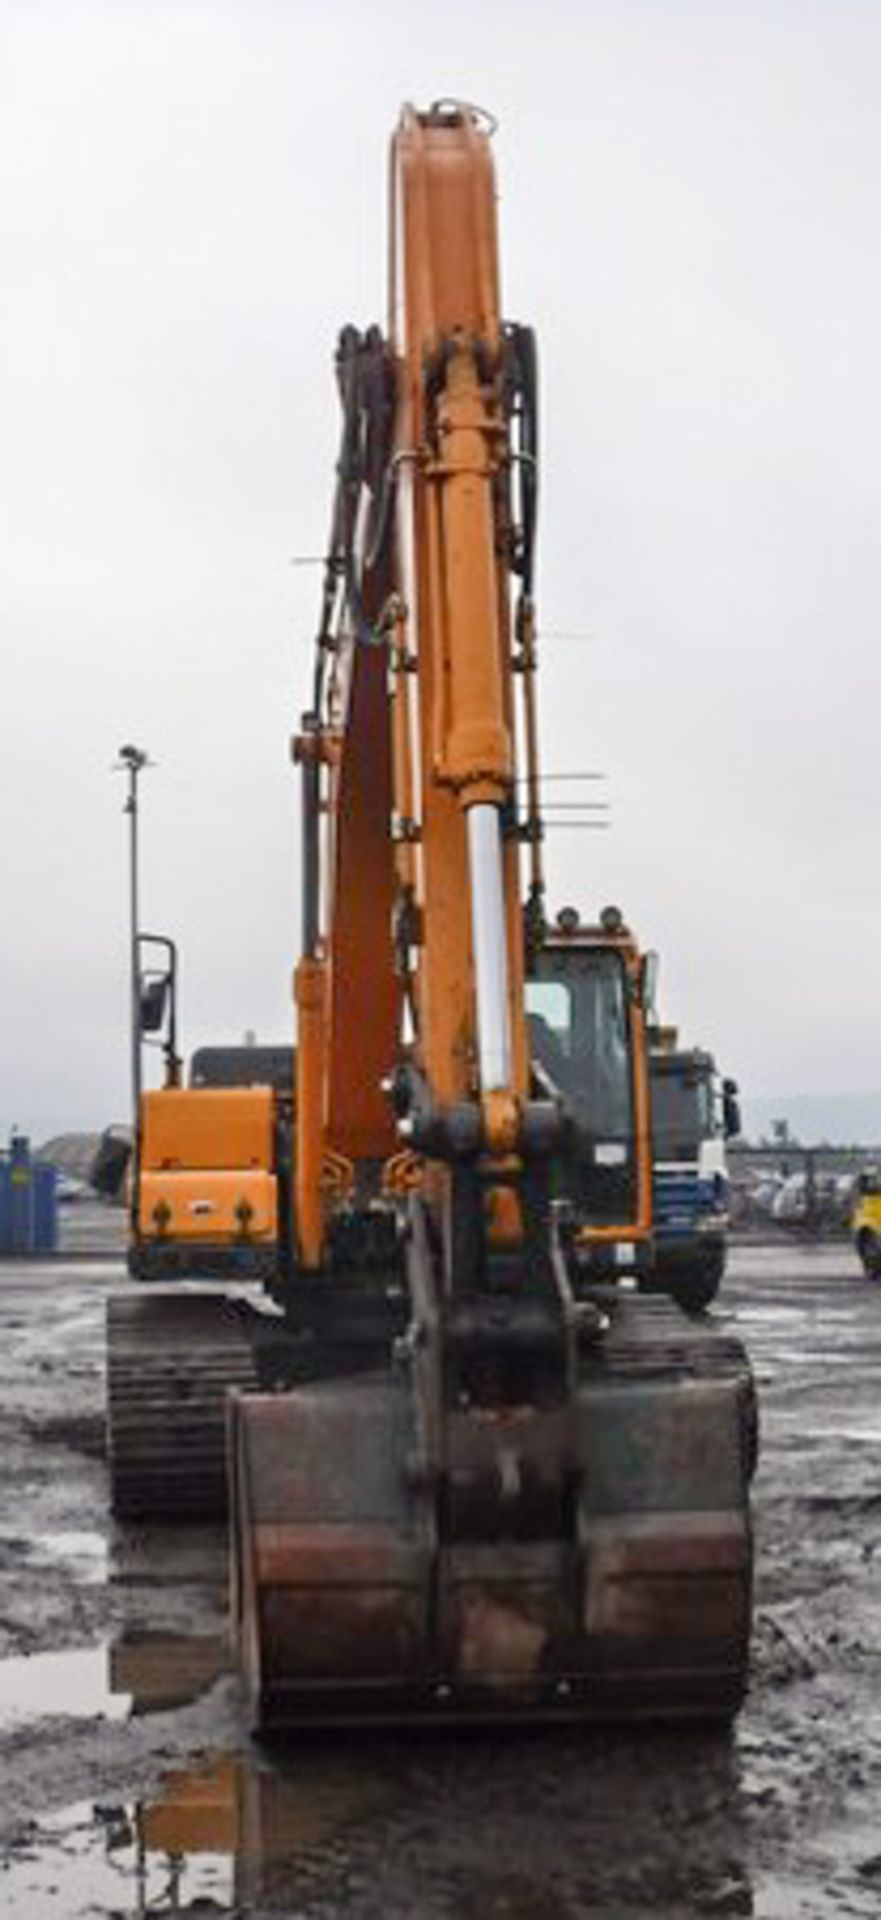 2014 HYUNDAI RC220 LC9A, S/N 359, 2340HRS (NOT VERIFIED), 1 BUCKET, MAX REACH 10M, HYD LINES FOR PIP - Image 10 of 17